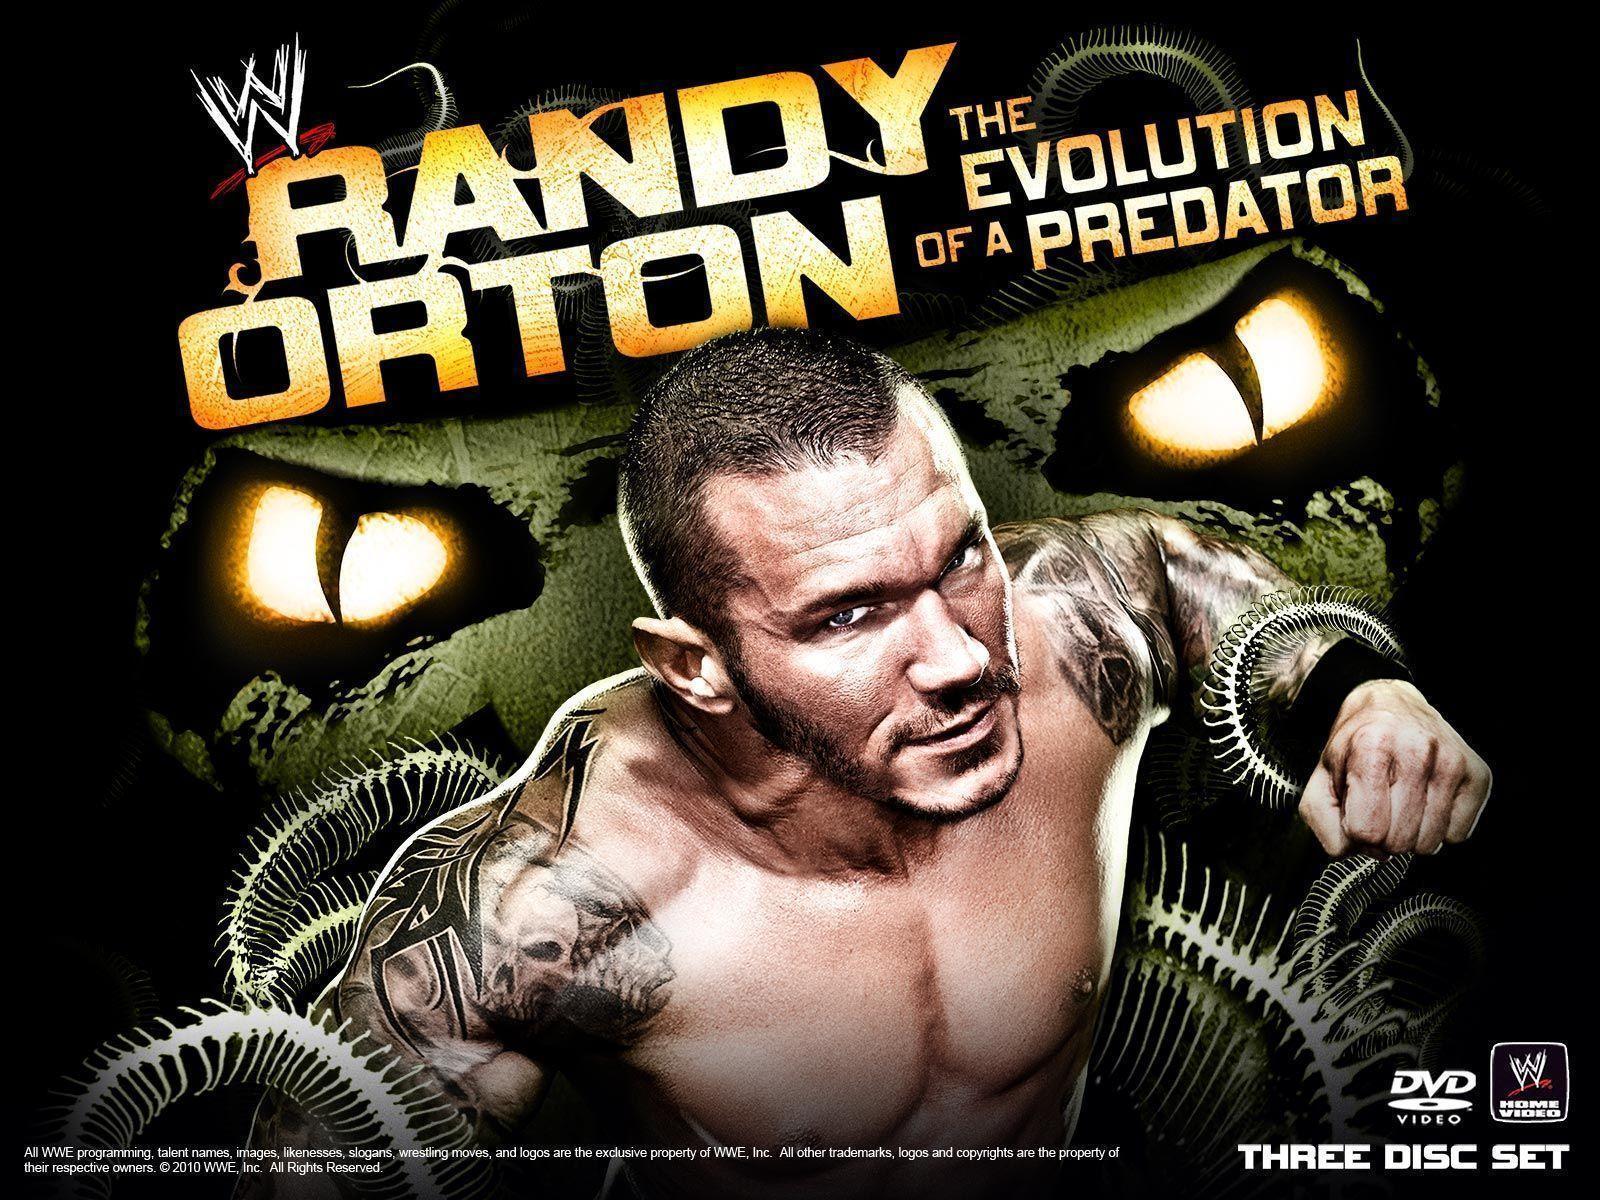 wwe image Evolution of a predator HD fond d'écran and background